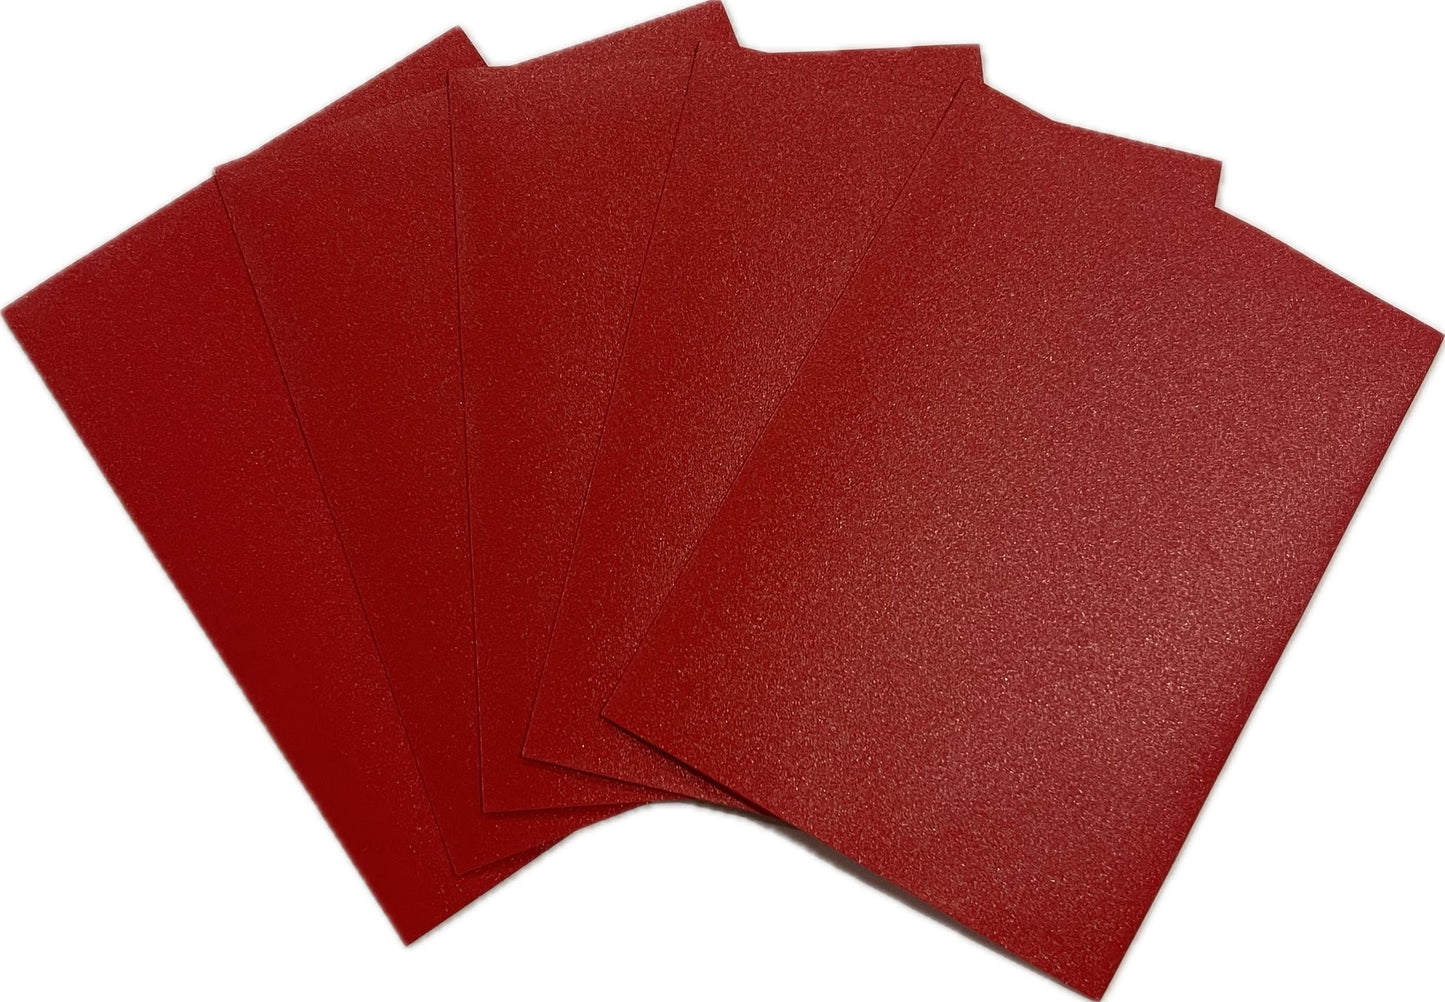 Standard Size Card Sleeves - Red - 100 Count - 66 x 91mm